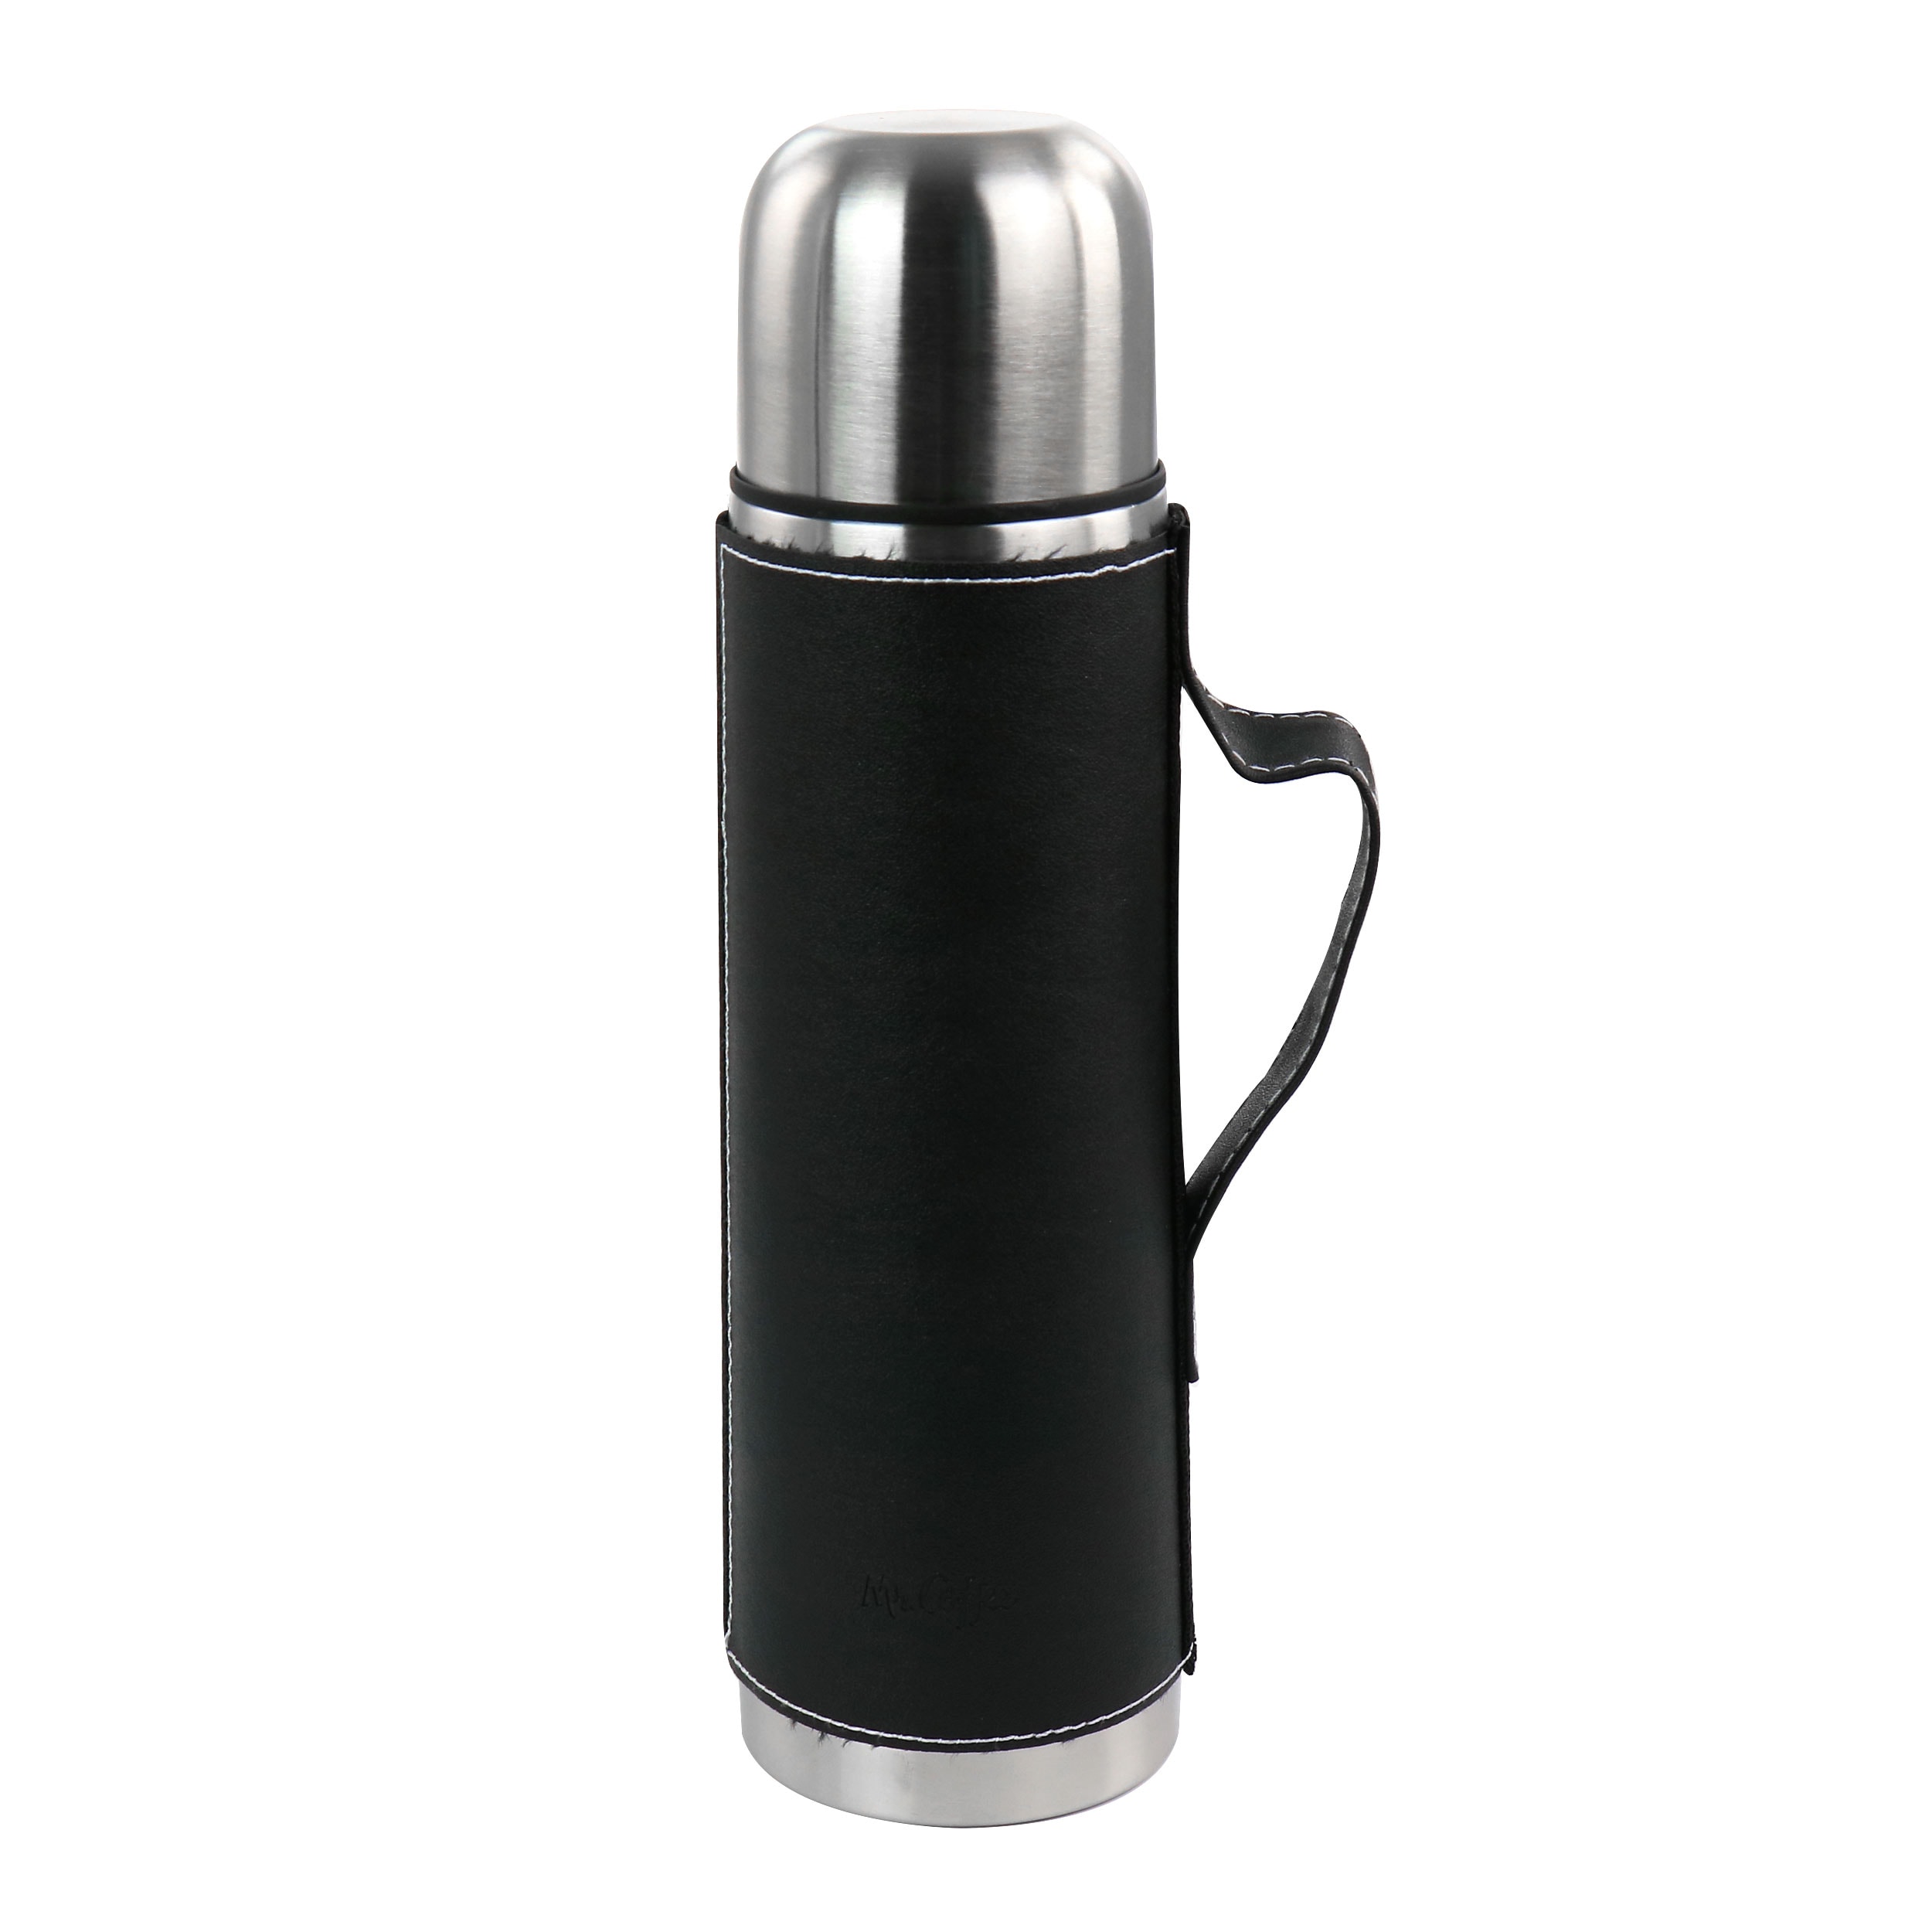 Brentwood 68 oz. Stainless Steel Coffee Thermos 